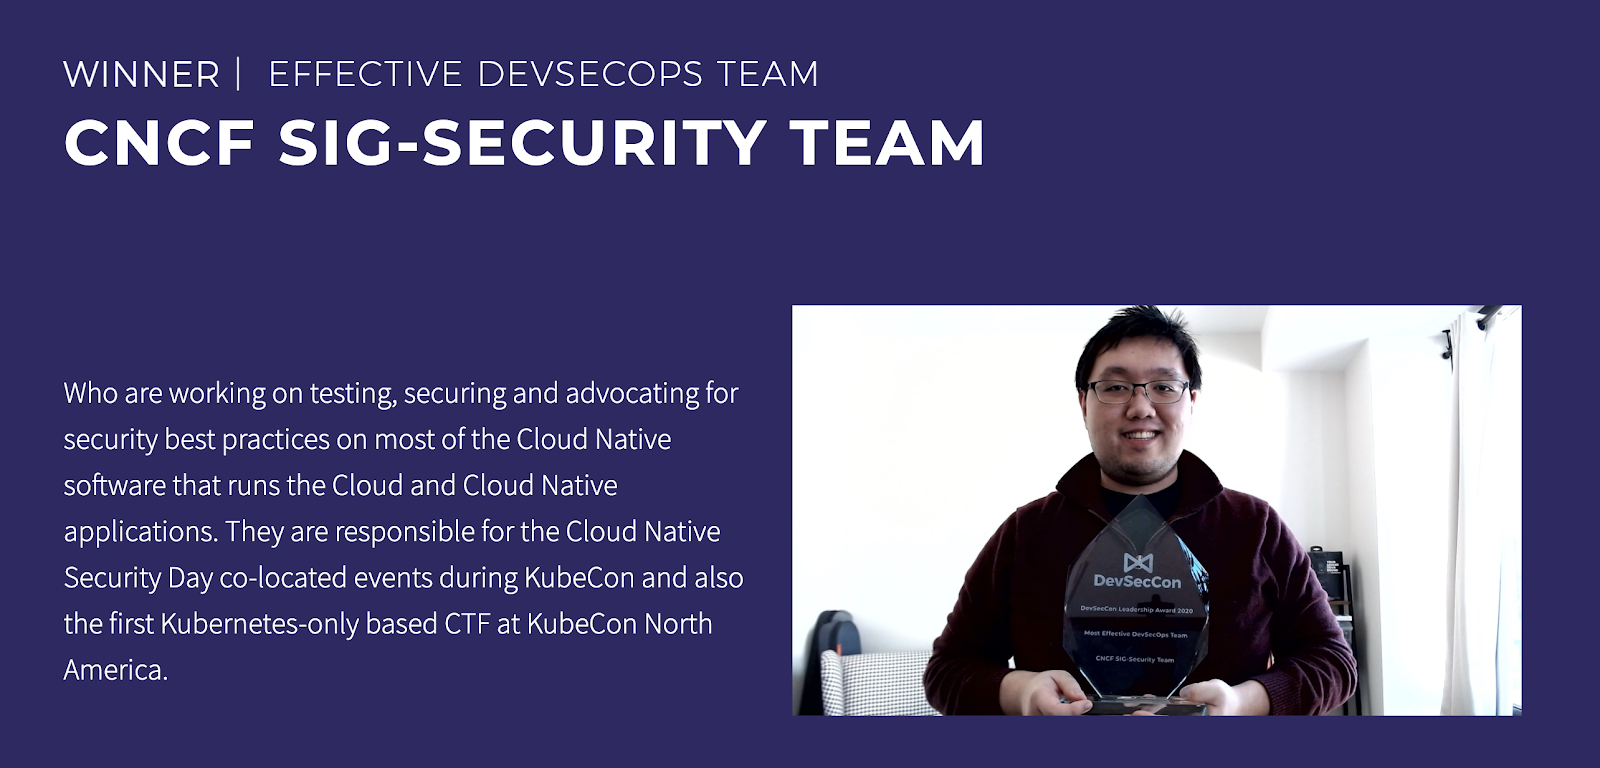 A gentleman in spectacles wearing maroon jacket holding a DevSecCon trophy representing CNCF SIG-Security team of winning the most effective DevSecOps team category